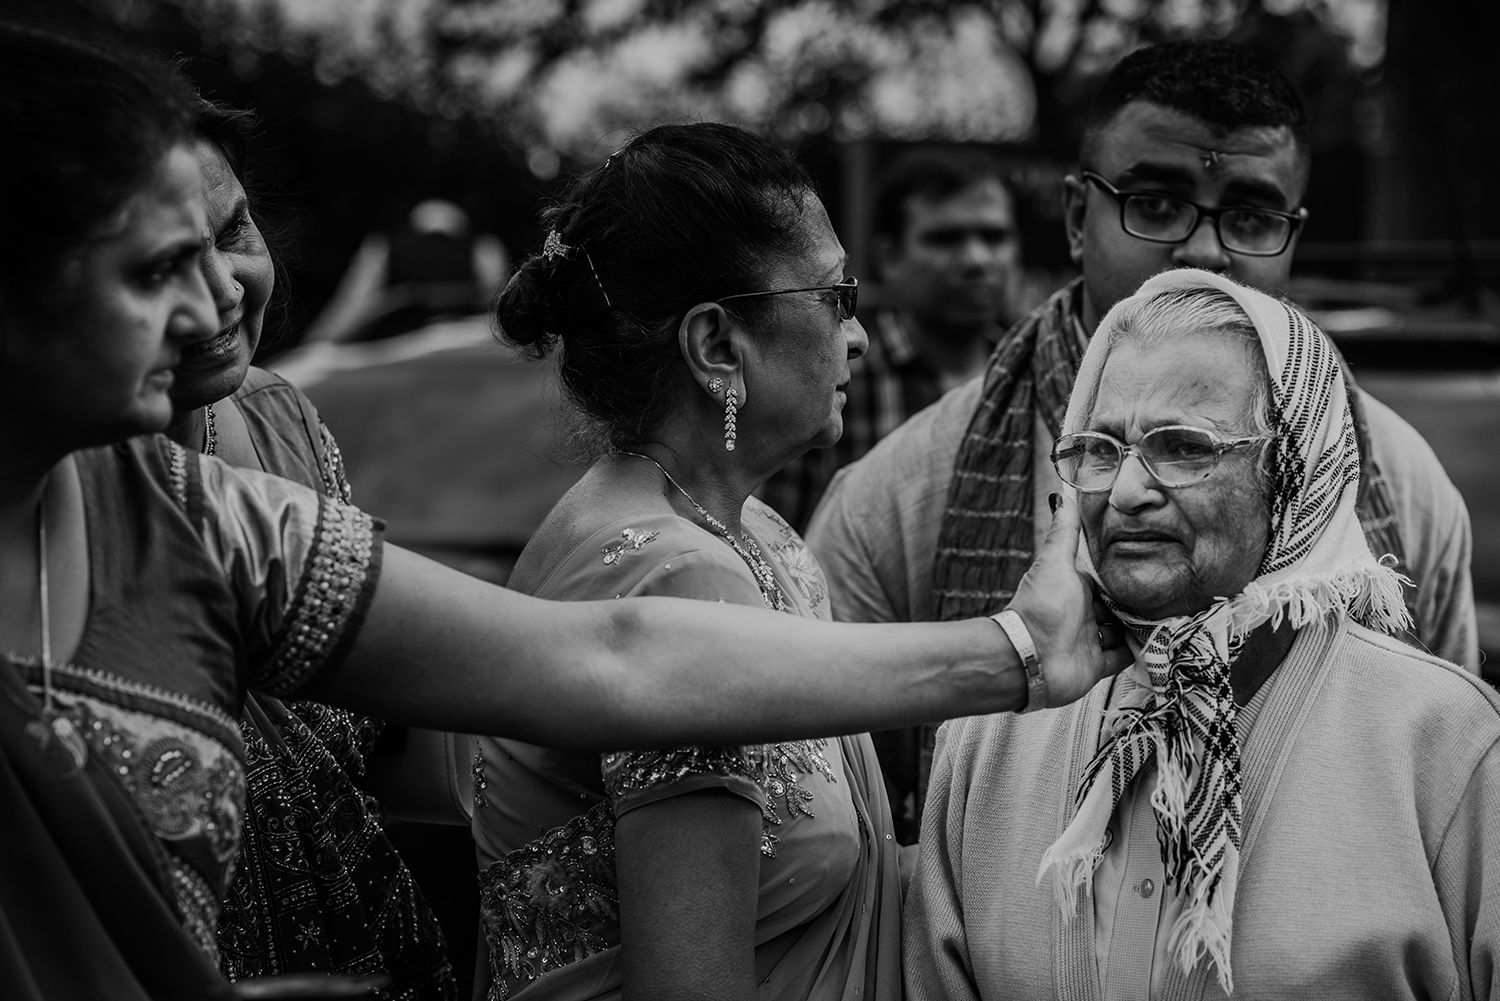  bw photo. Brides aunt tenderly comforting an emotional grandmother 